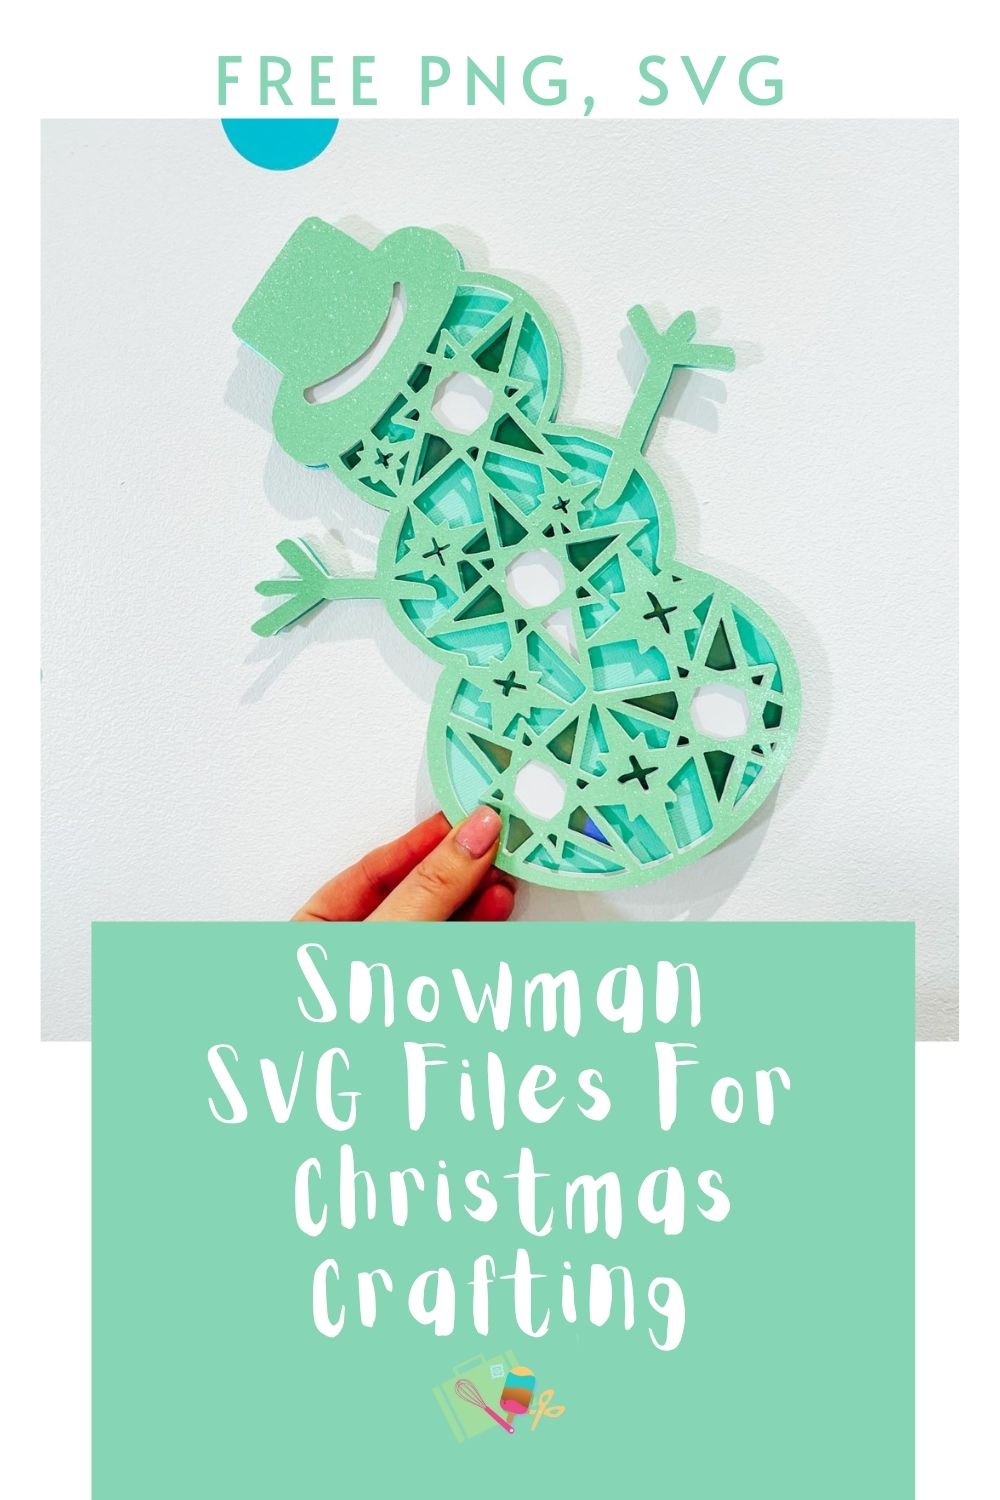 Cute Snowman SVG Snowman For Christmas Crafting Projects With Cricut and Silhouette